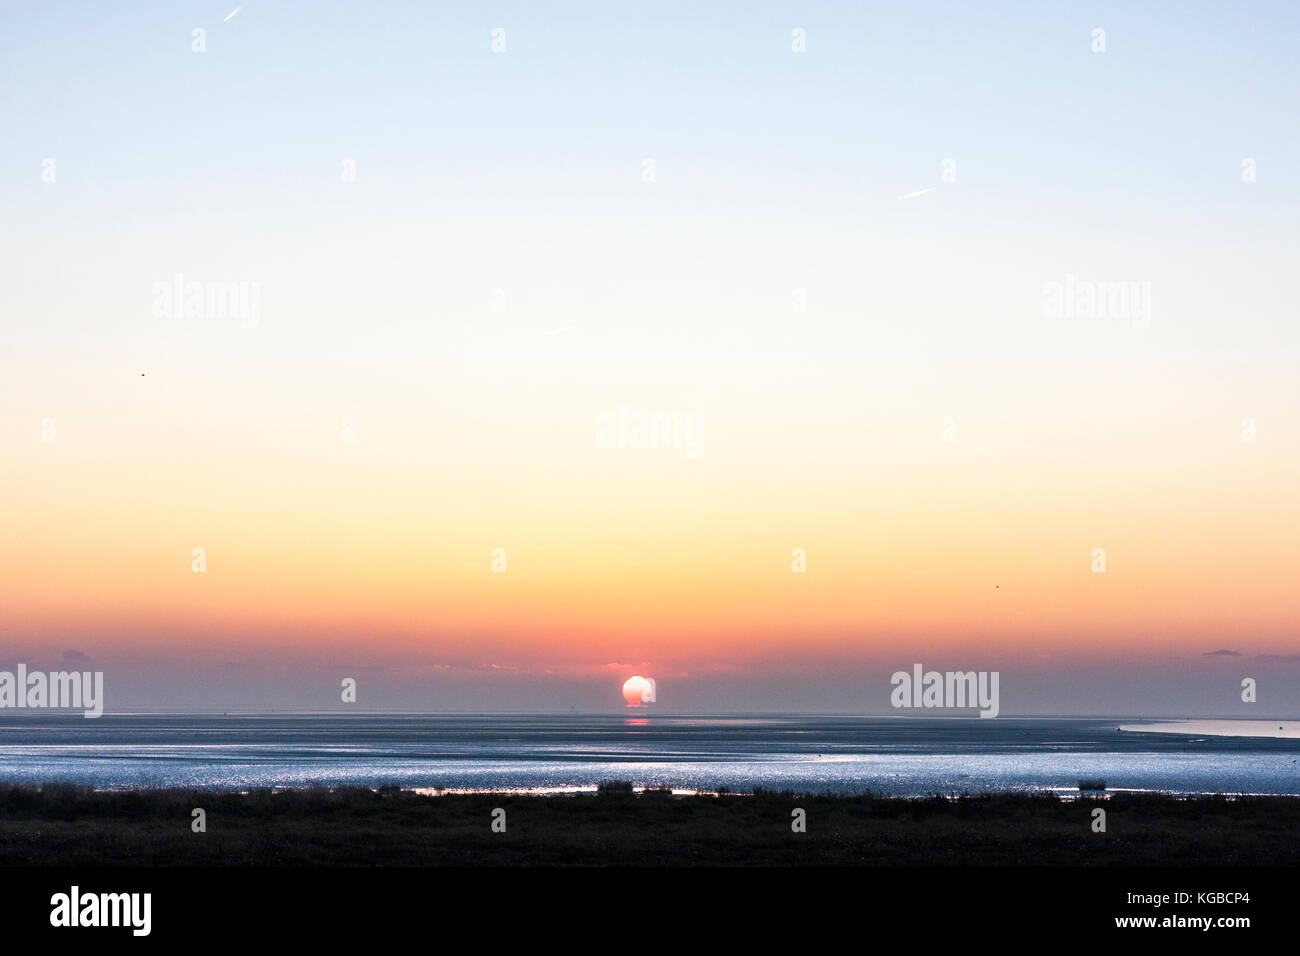 Sun rising over the sea with salt water spartina grass marsh in foreground. Faint cloud on horizon, sky clear above. Calm sea. Pegwell Bay, at Ramsgate, England. Stock Photo